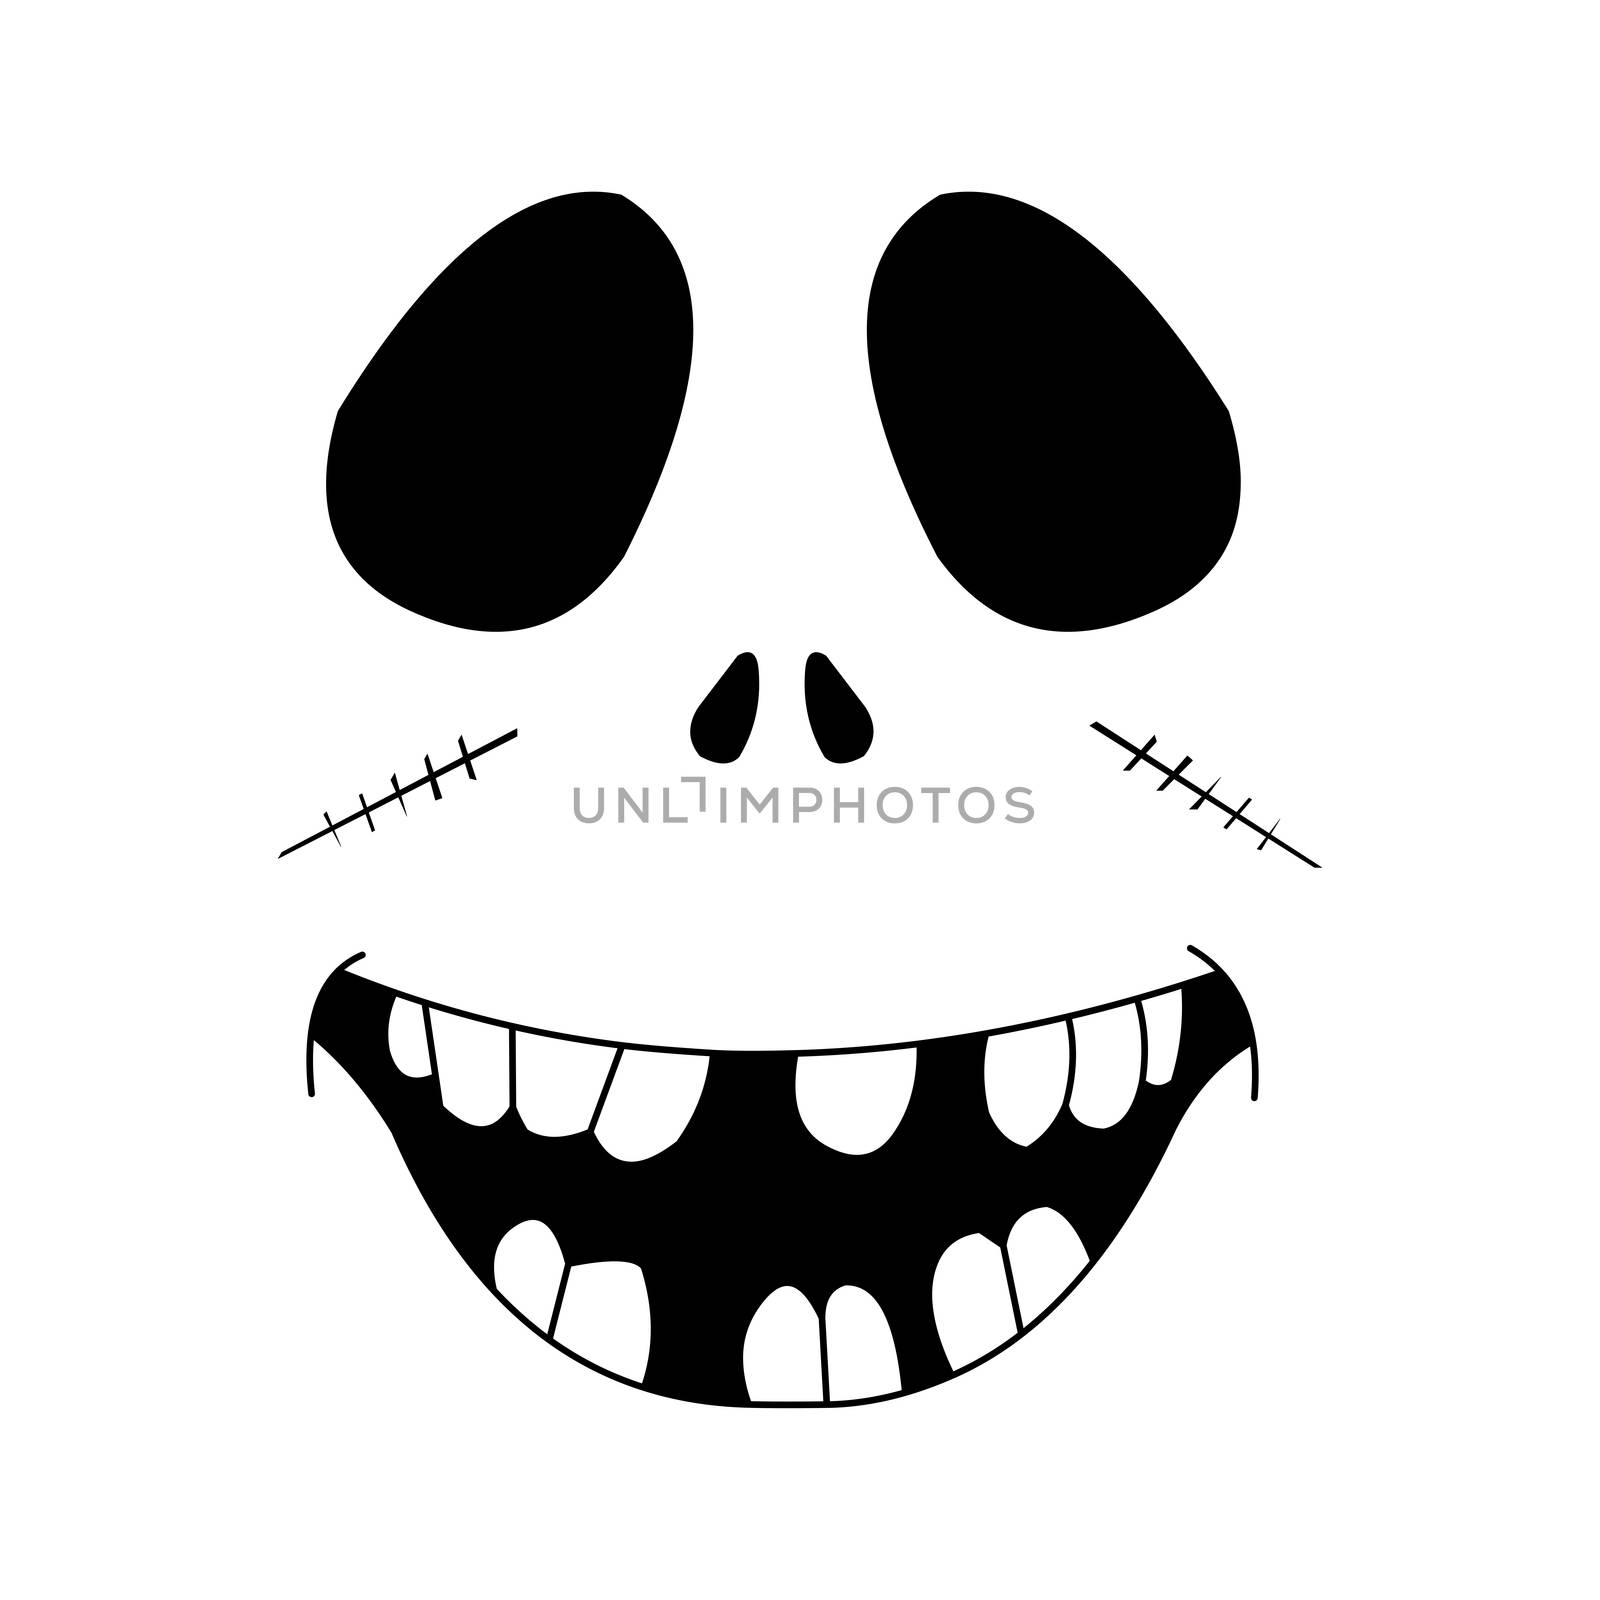 A black and white smiling Halloween zombie face.